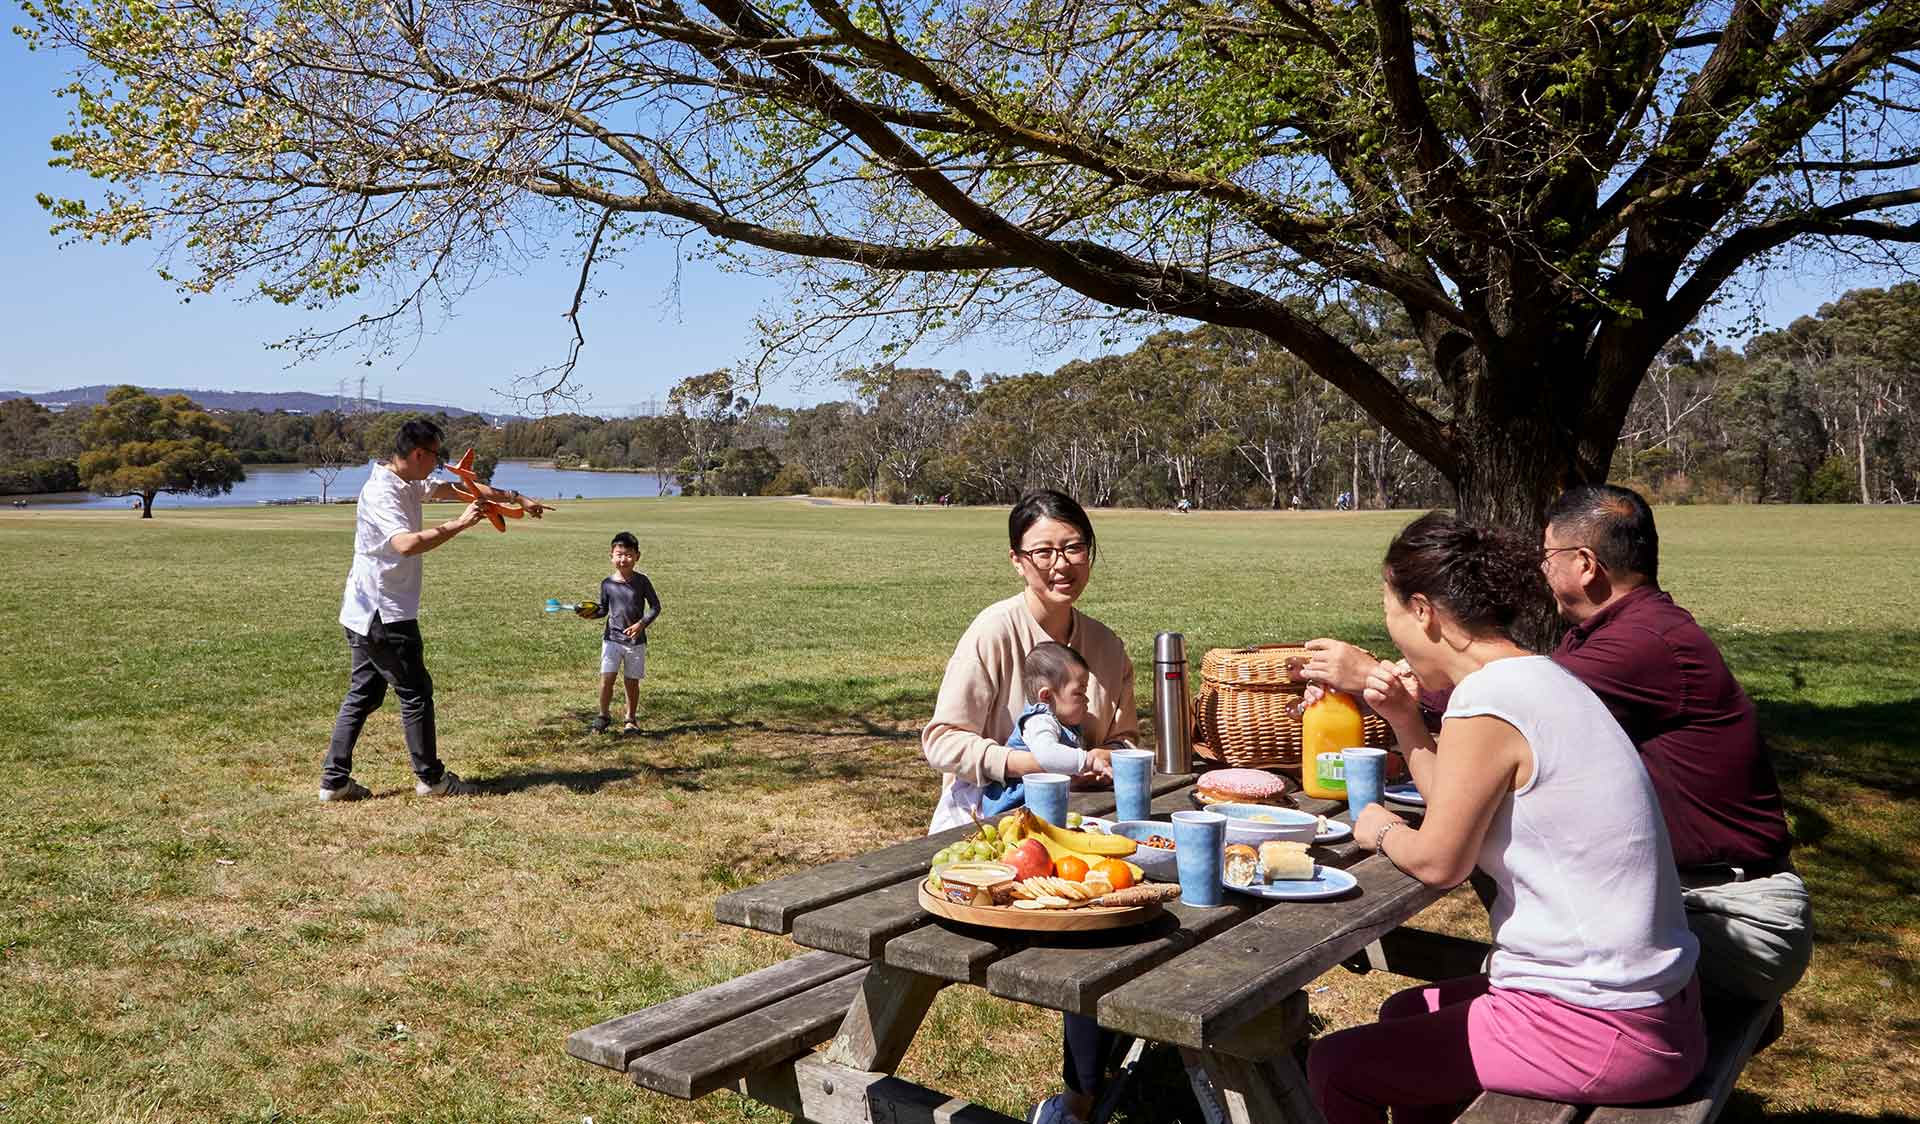 A family share a picnic while a father and son play with a model aircraft in the background.